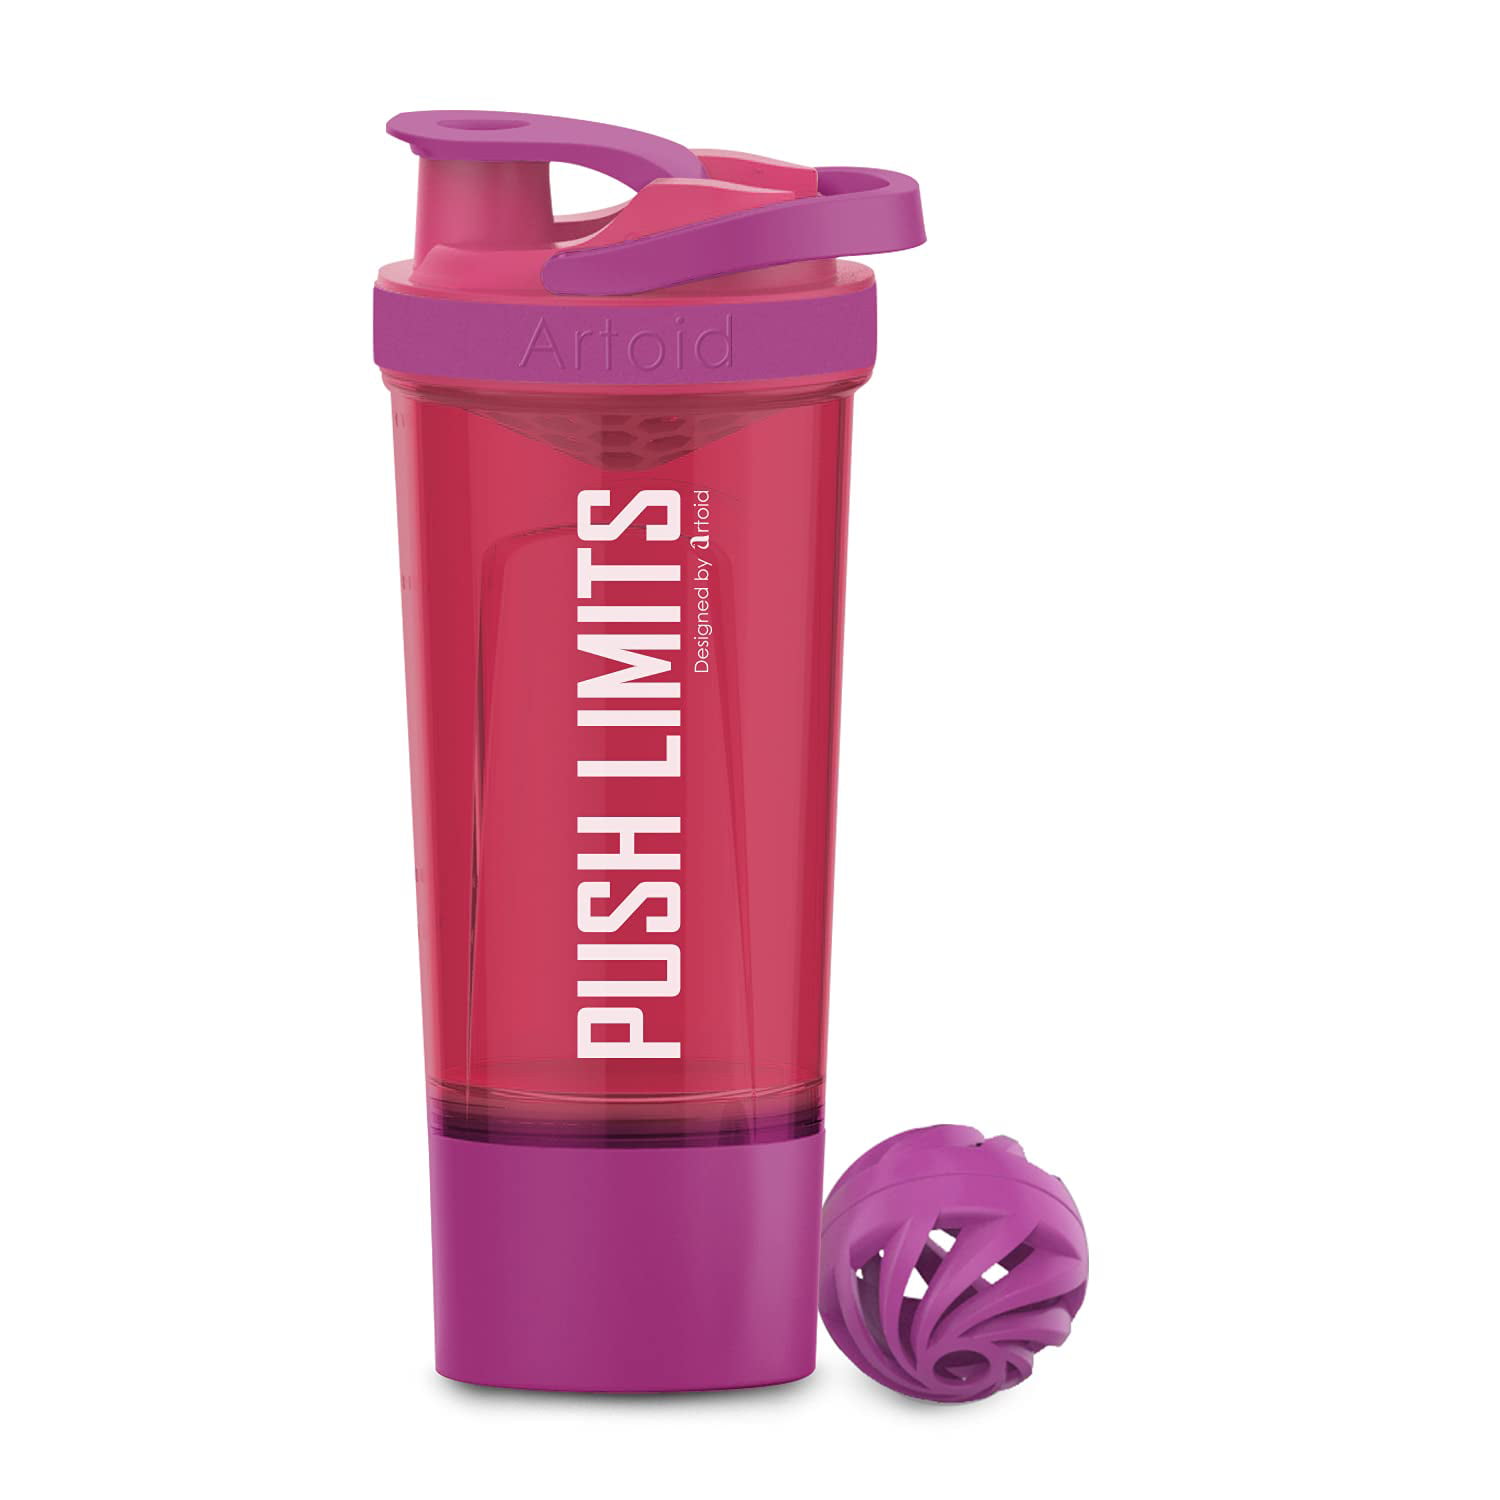 Prodigy Nutrition Labs Premium Pink Shaker Bottle Perfect for